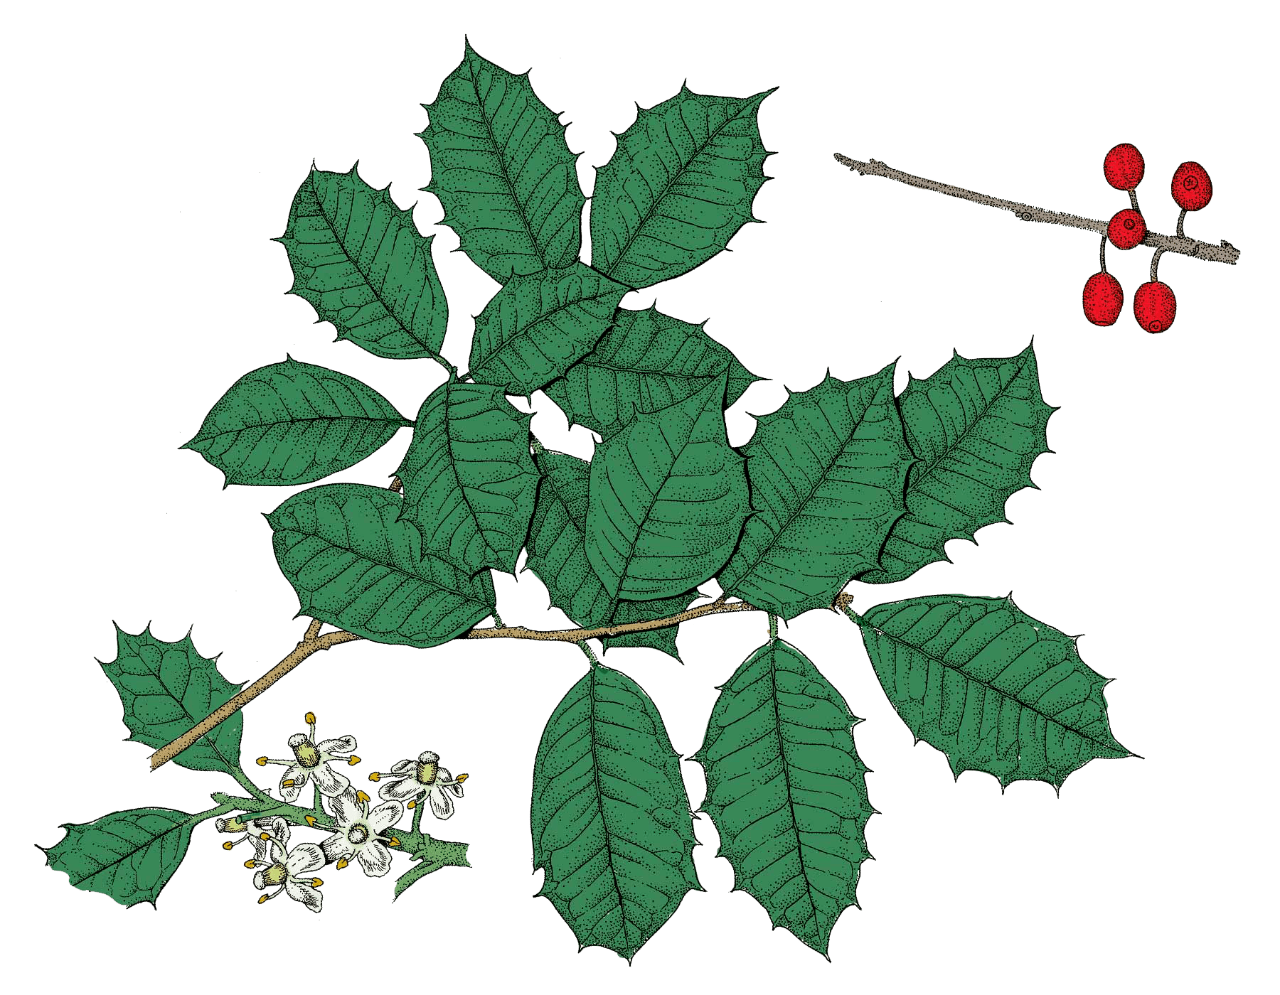 drawing of american holly leaves